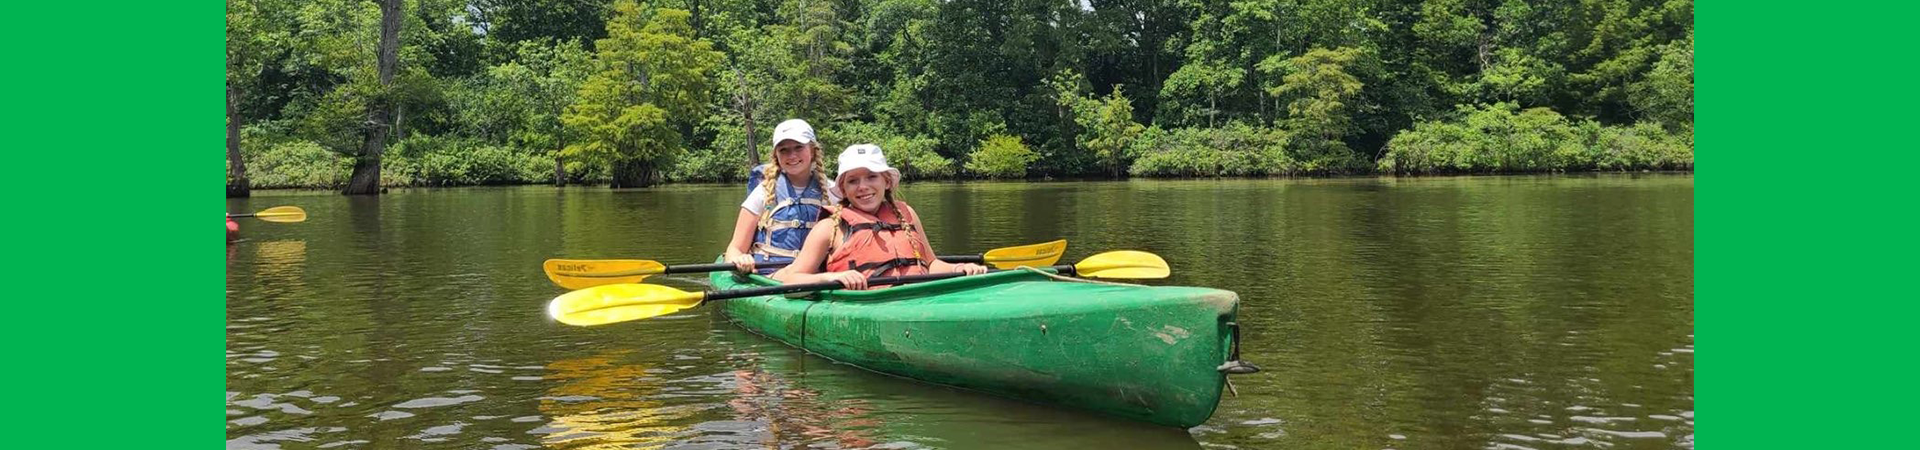  girl scouts kayaking together 